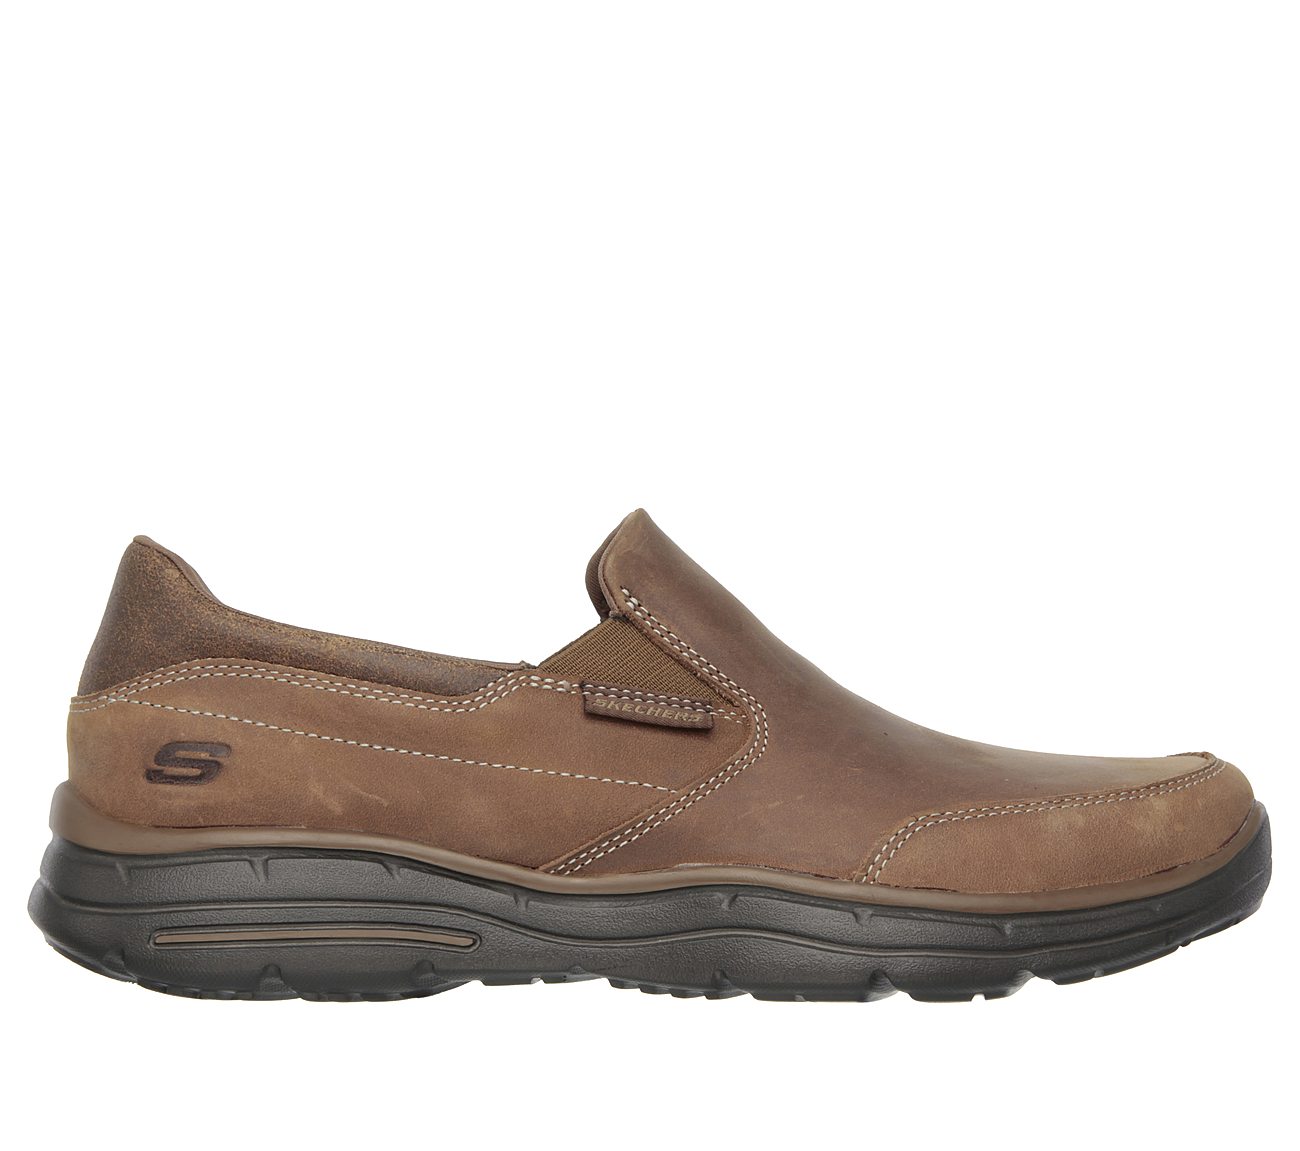 Buy SKECHERS Relaxed Fit: Glides - Calculous USA Casuals Shoes